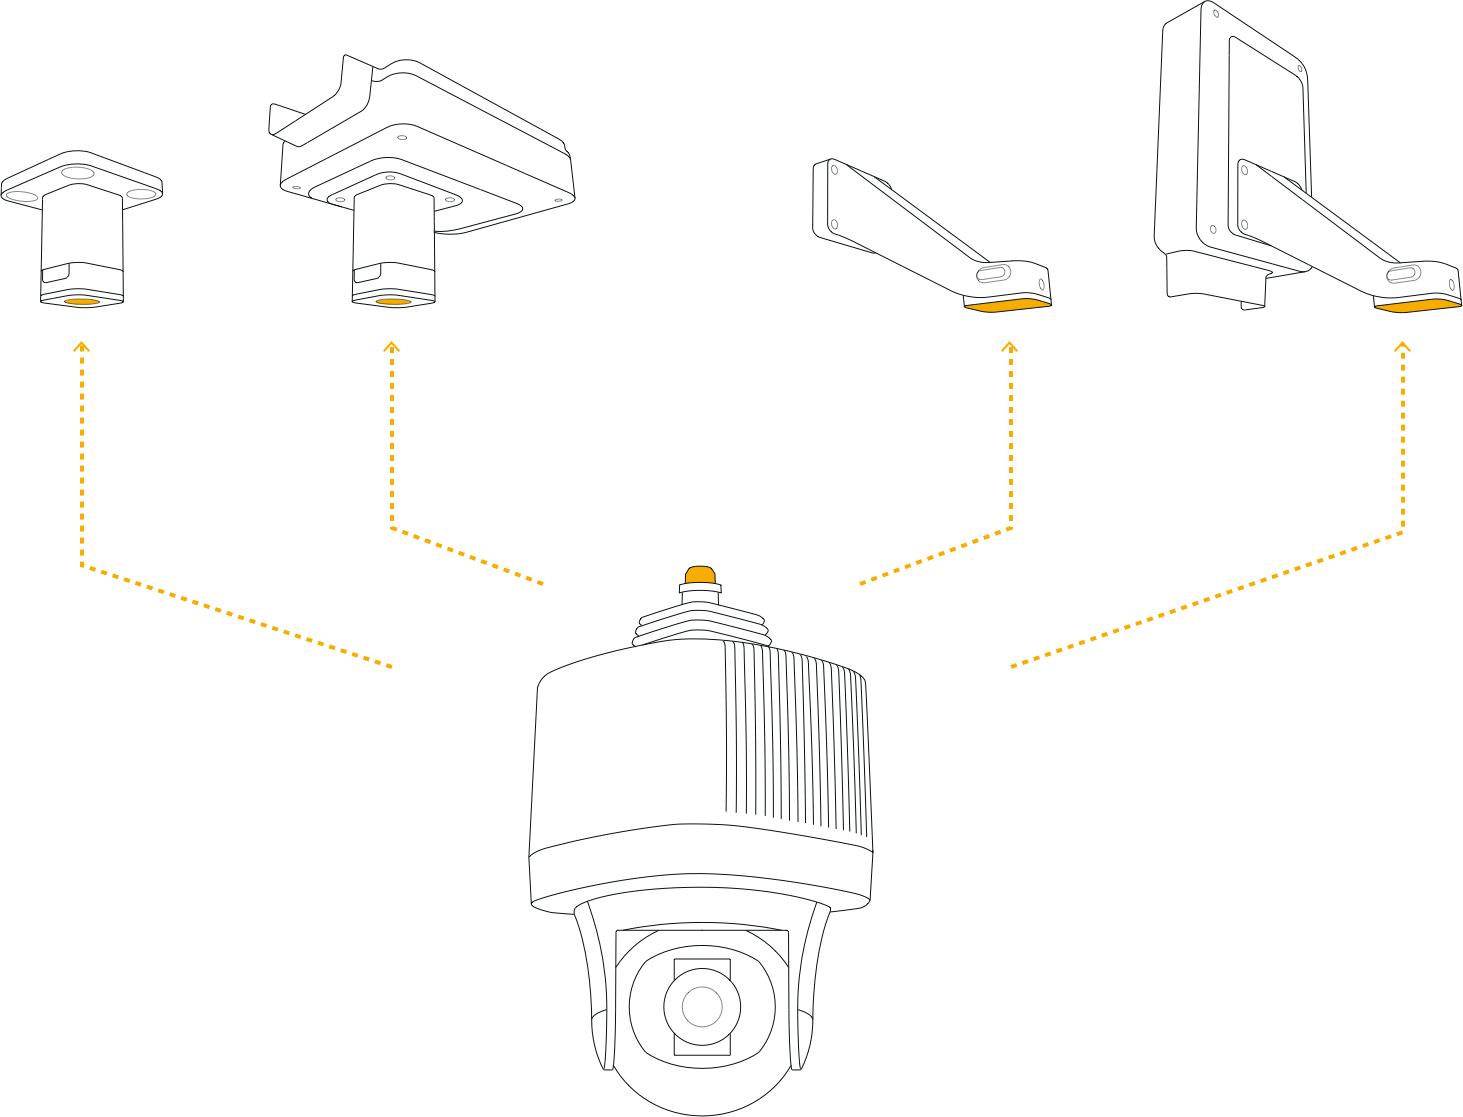 An illustration shows the flexibility of the components of the Panomera camera family.